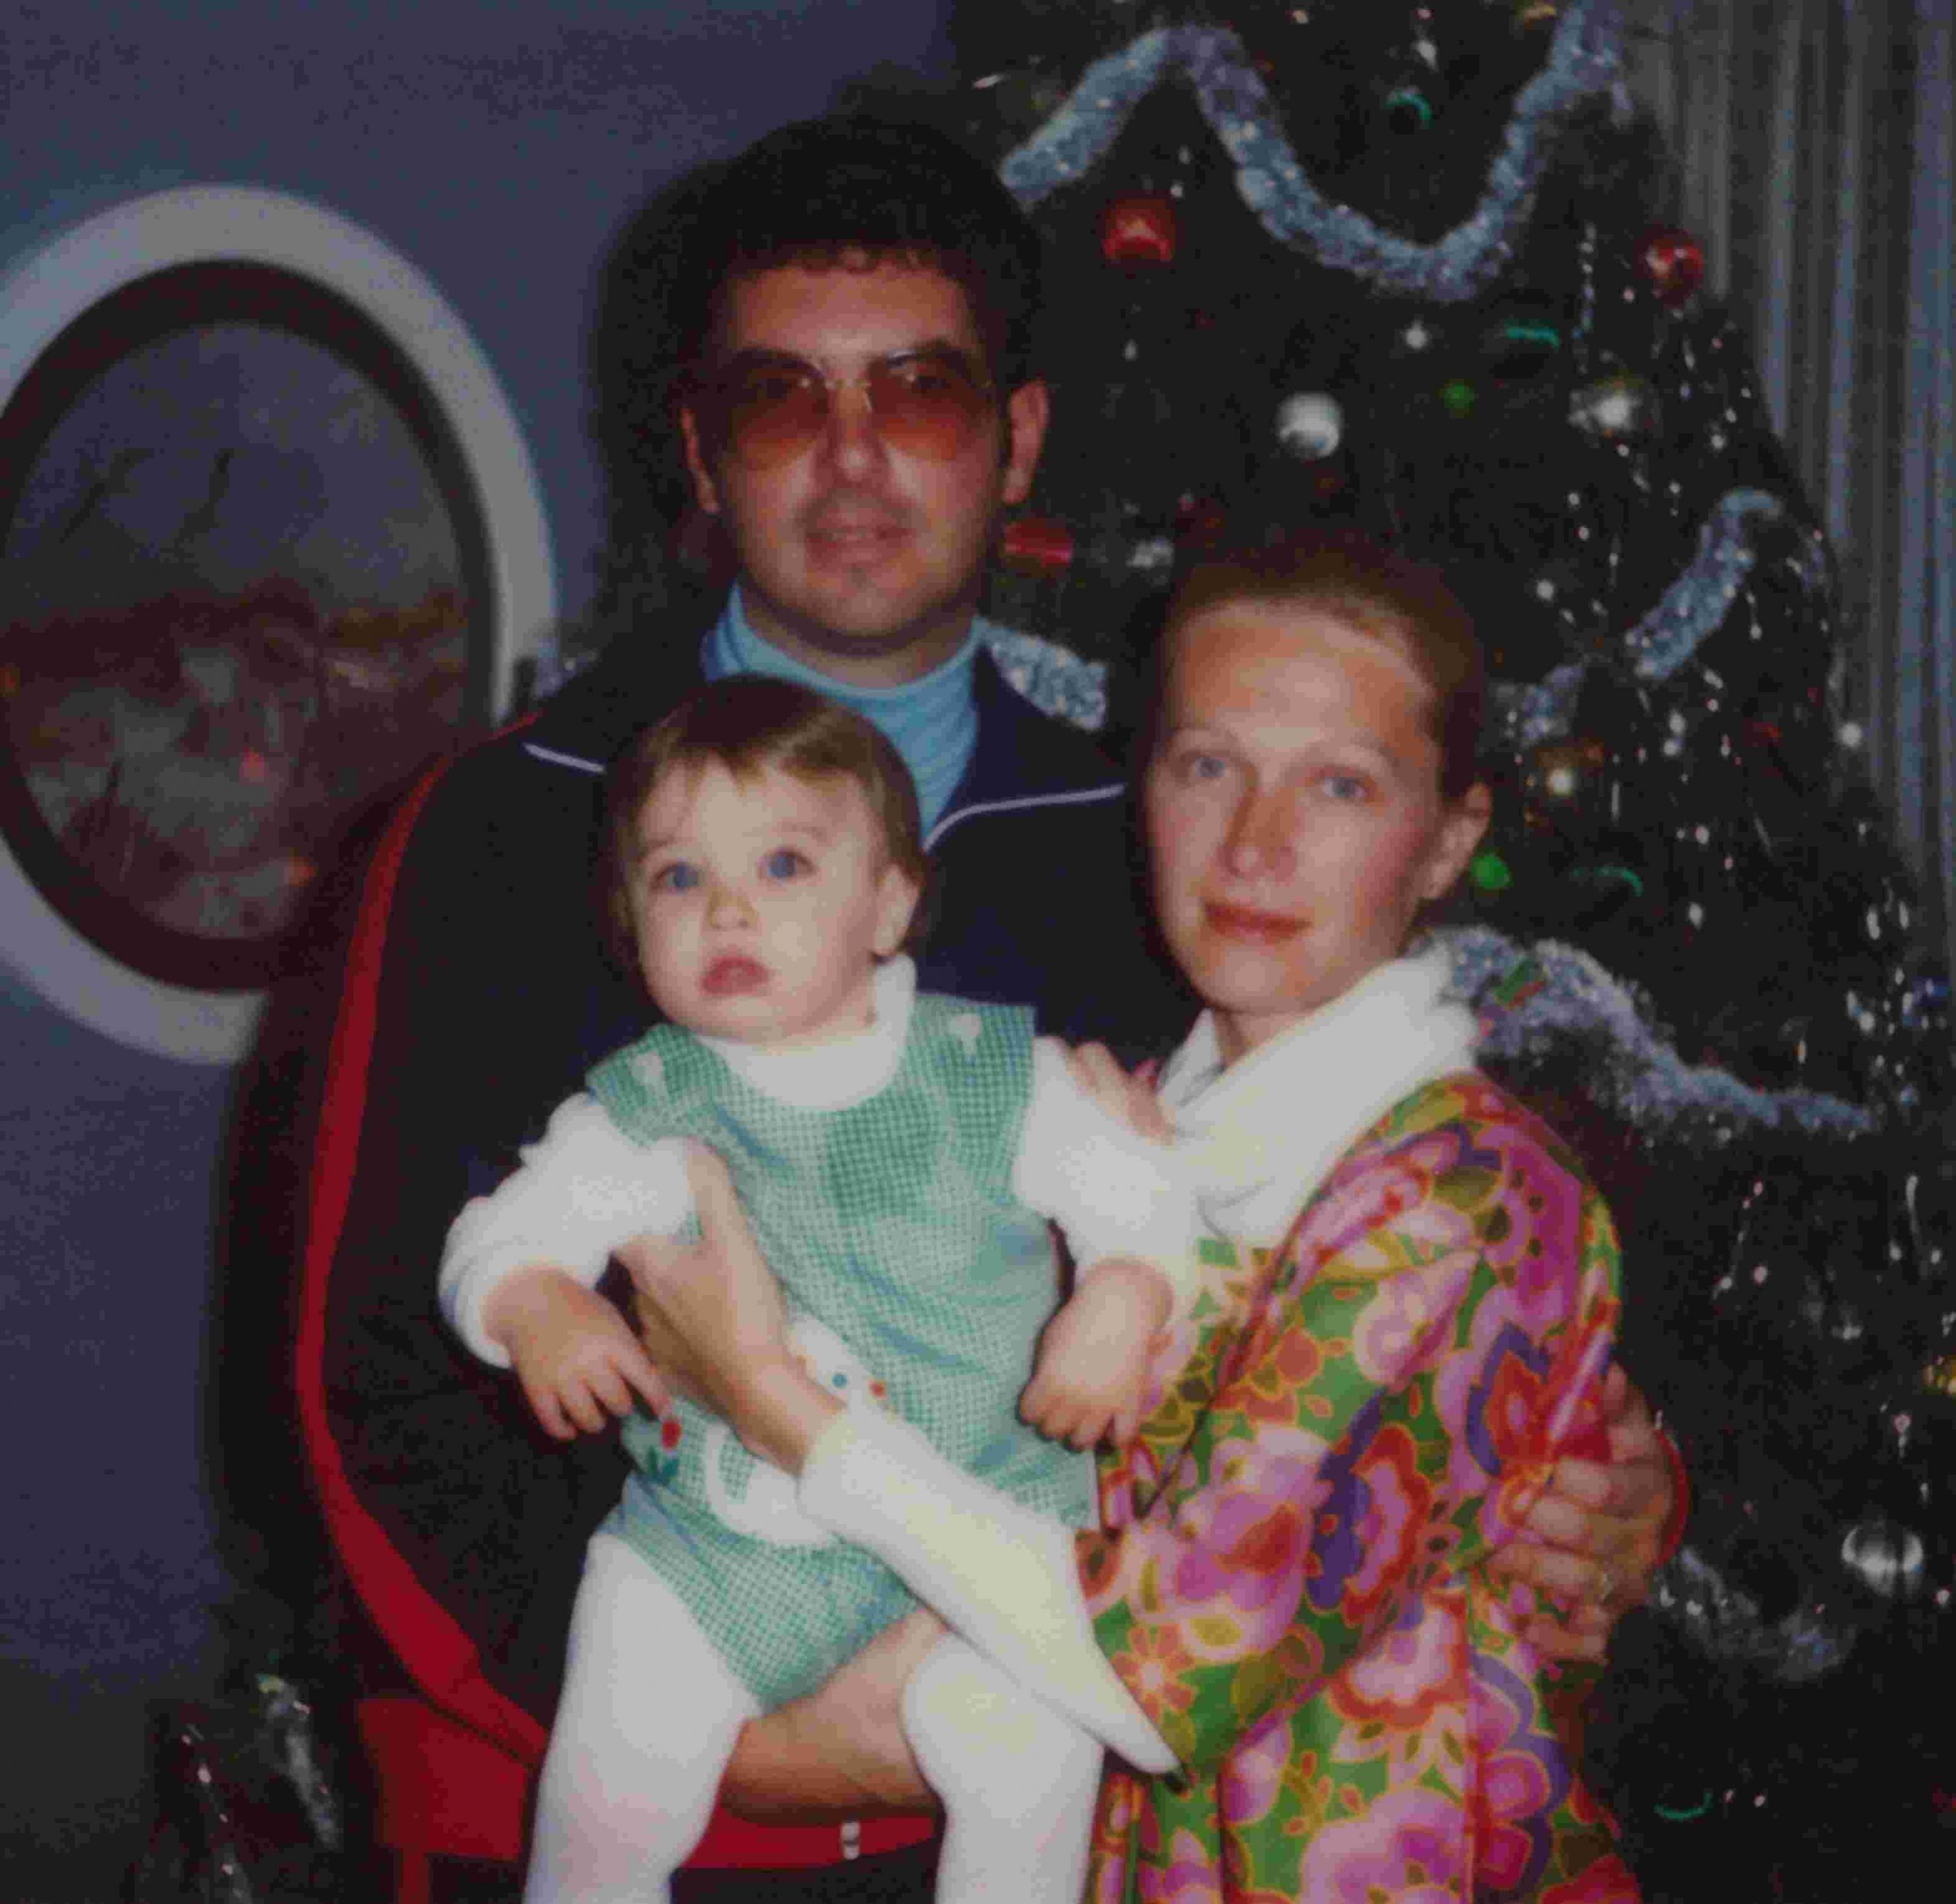 Collier Landry with his parents in childhood picture